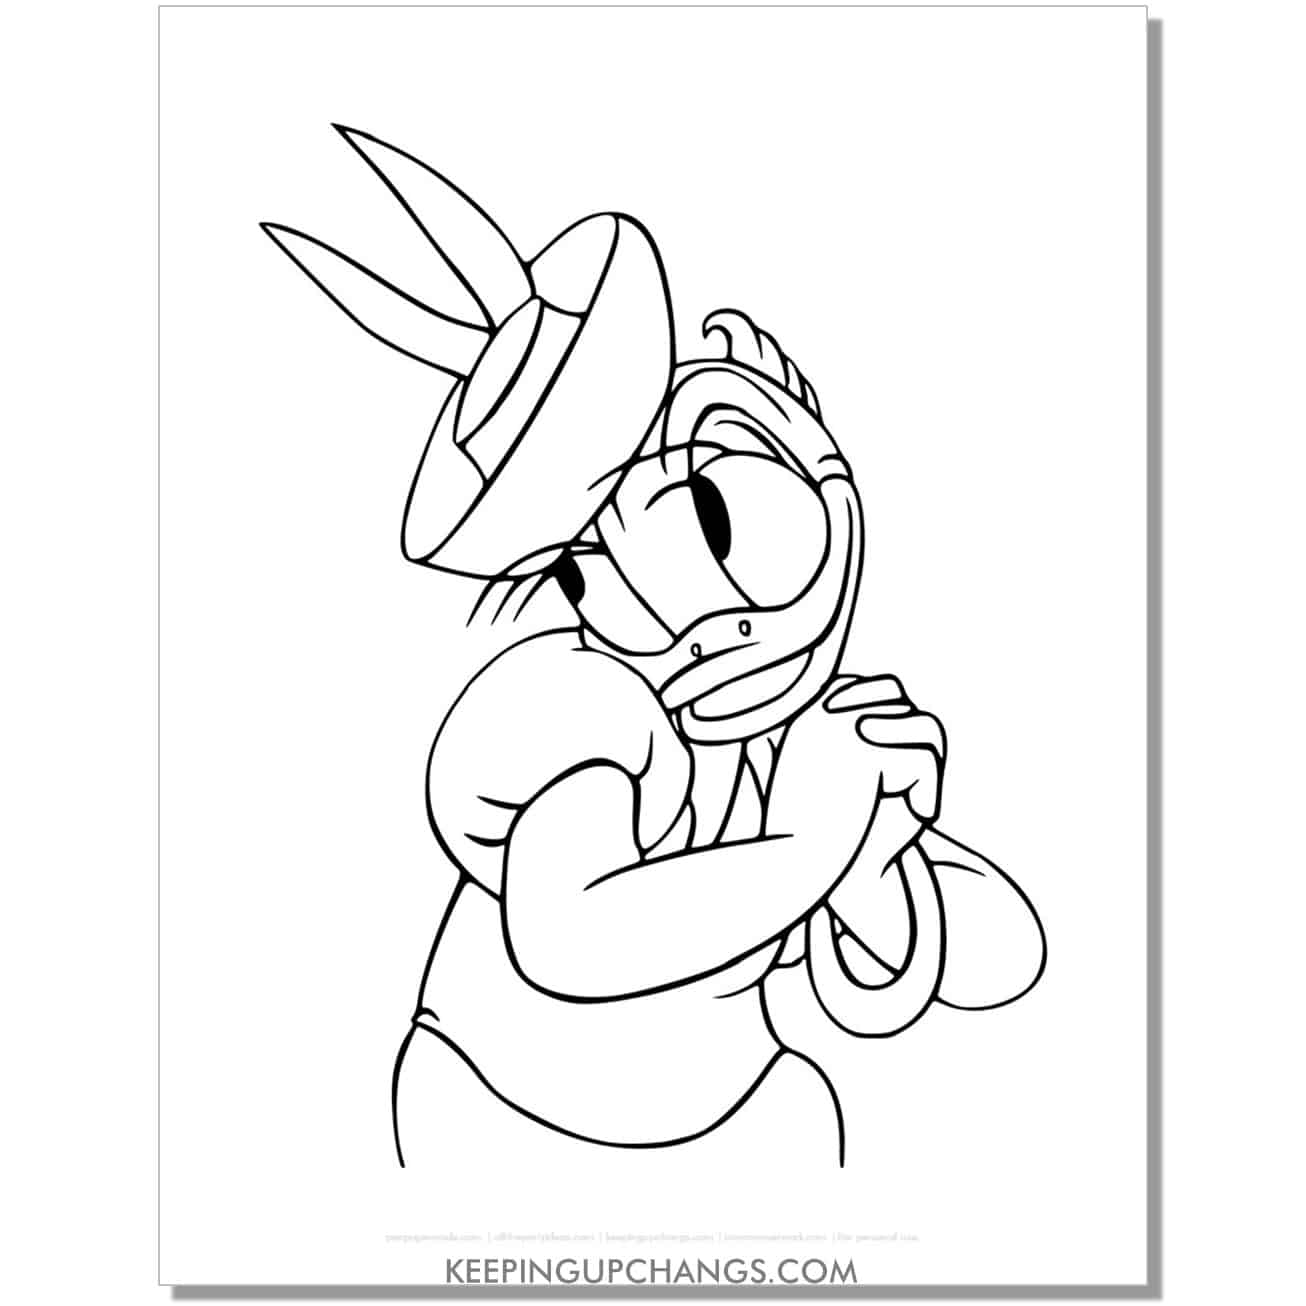 free daisy duck with hands together coloring page, sheet.